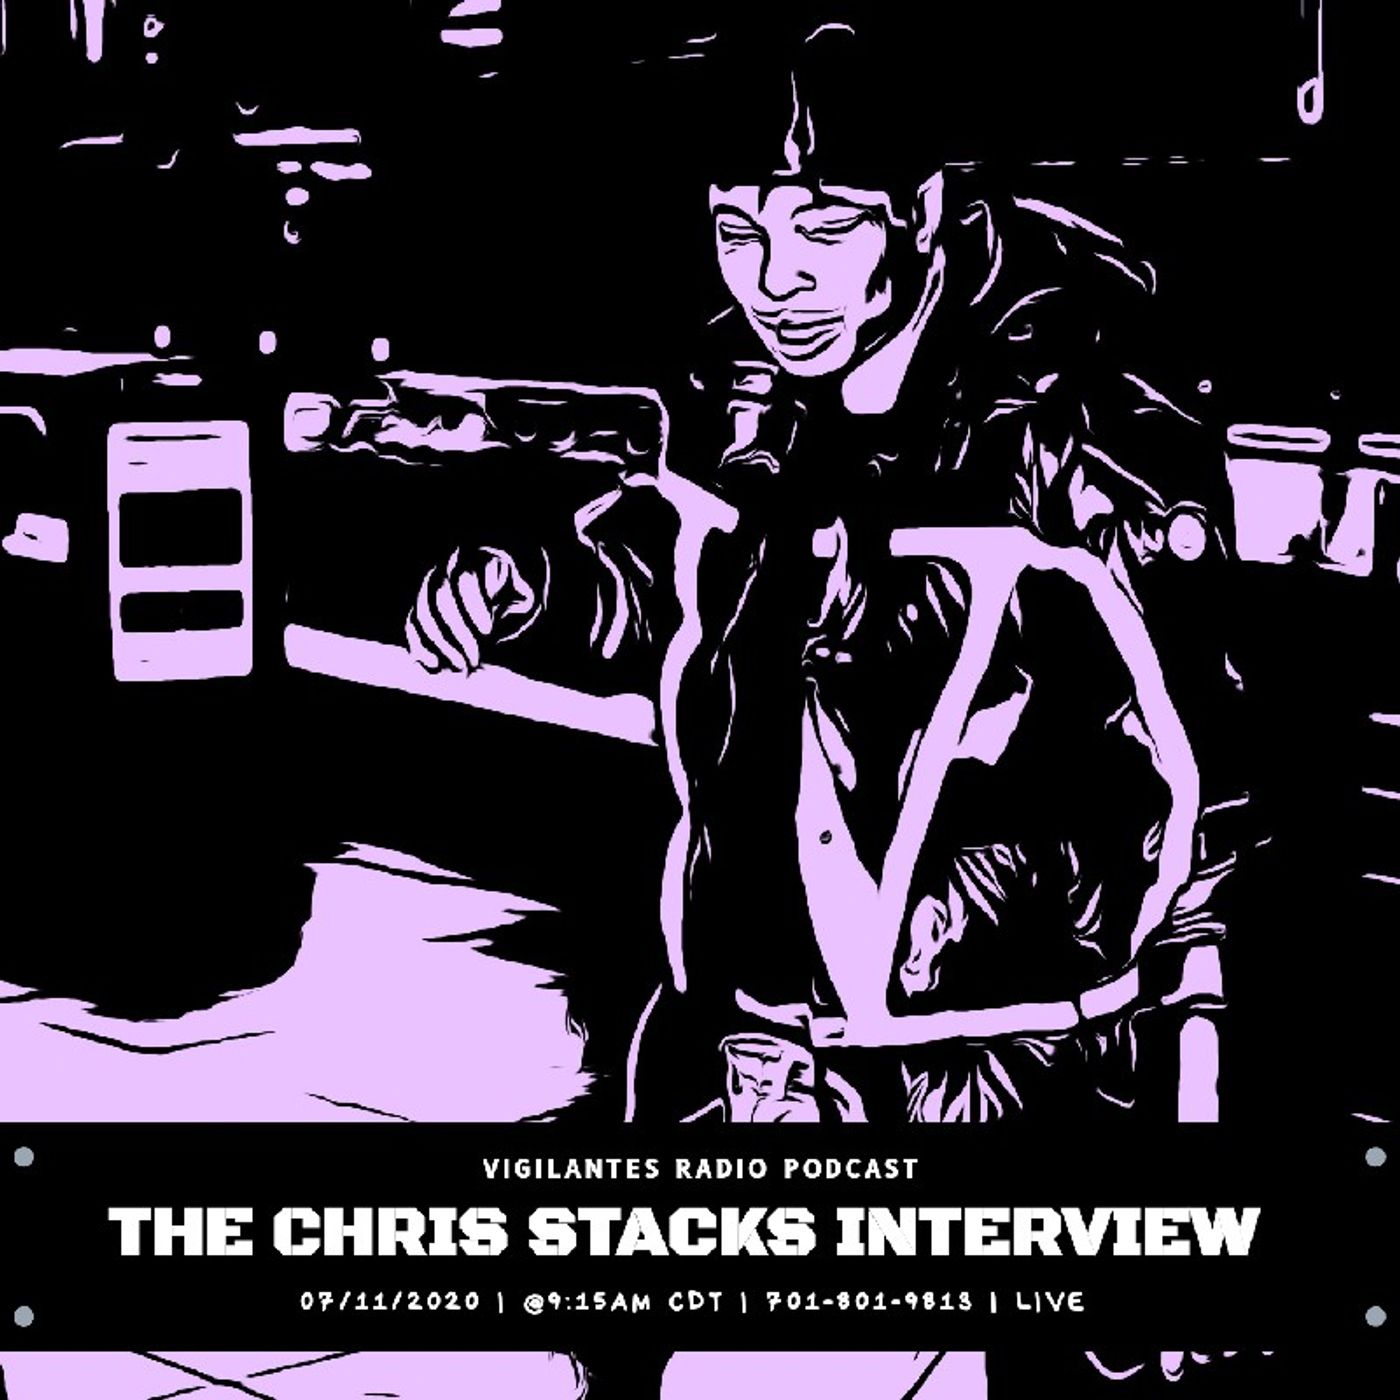 The Chris Stacks Interview. Image